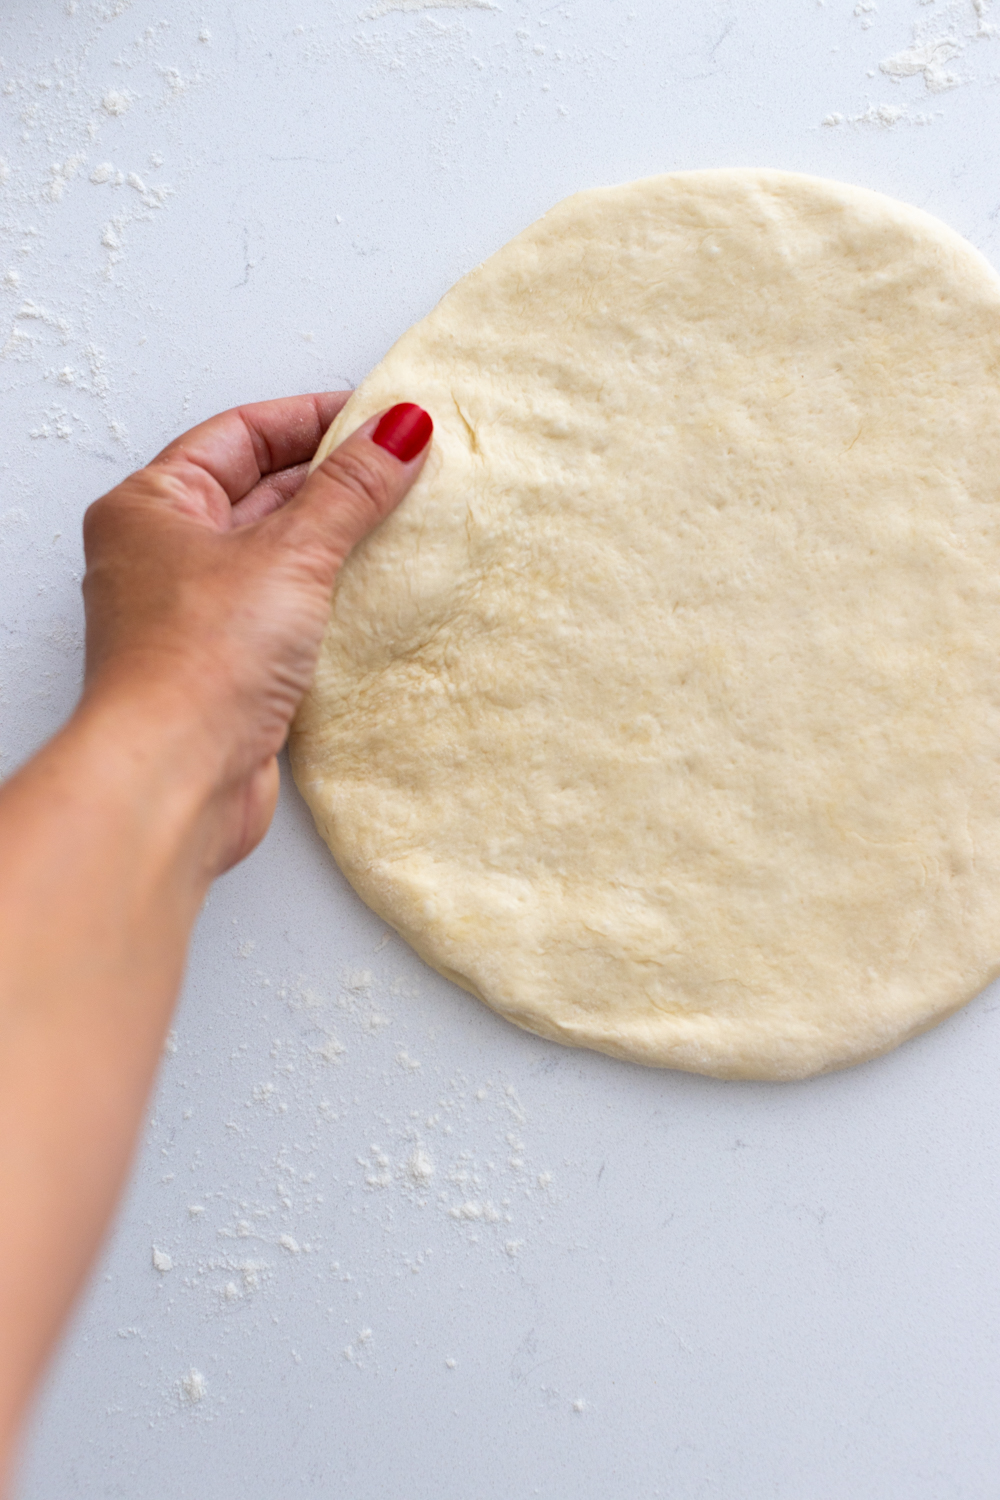 Shaping Quick and Easy Pizza Dough